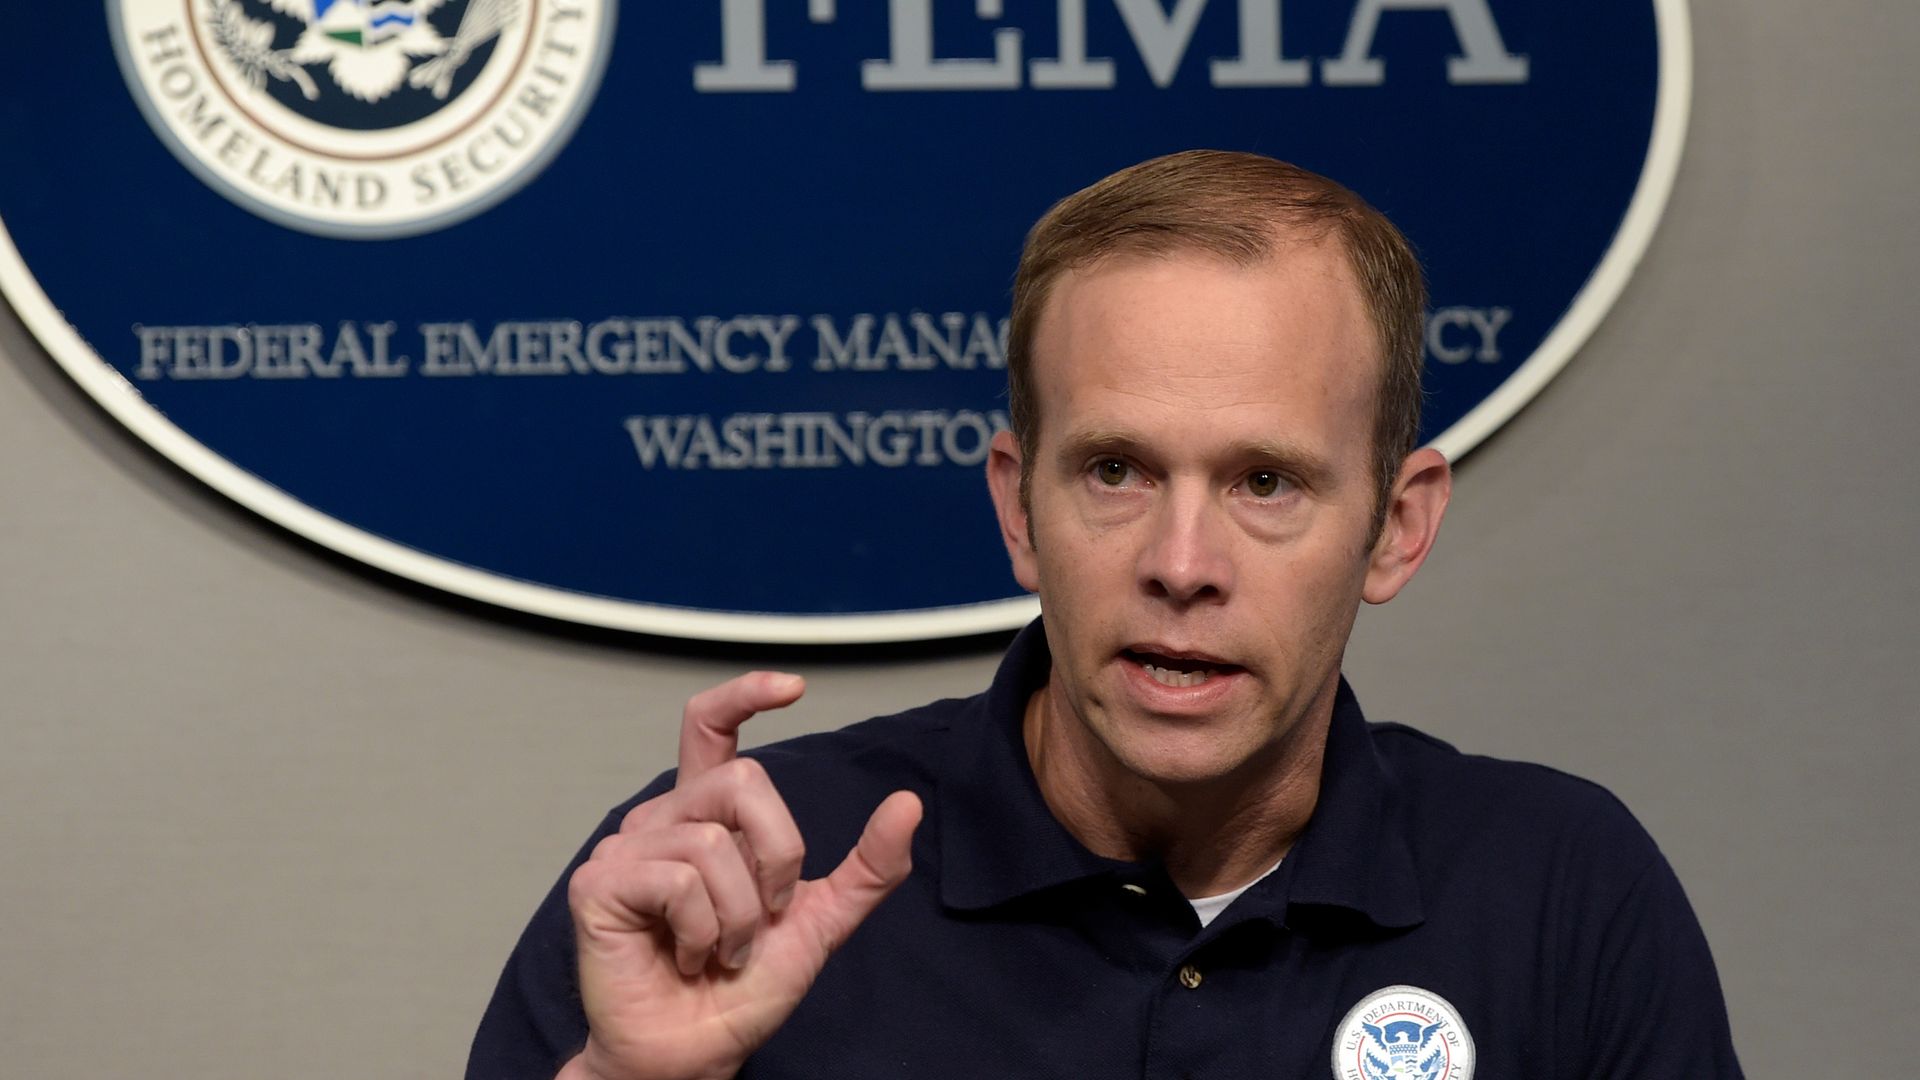 FEMA has announced the designation of nearly 500 Community Disaster Resilience Zones to protect against the threats of climate impacts.